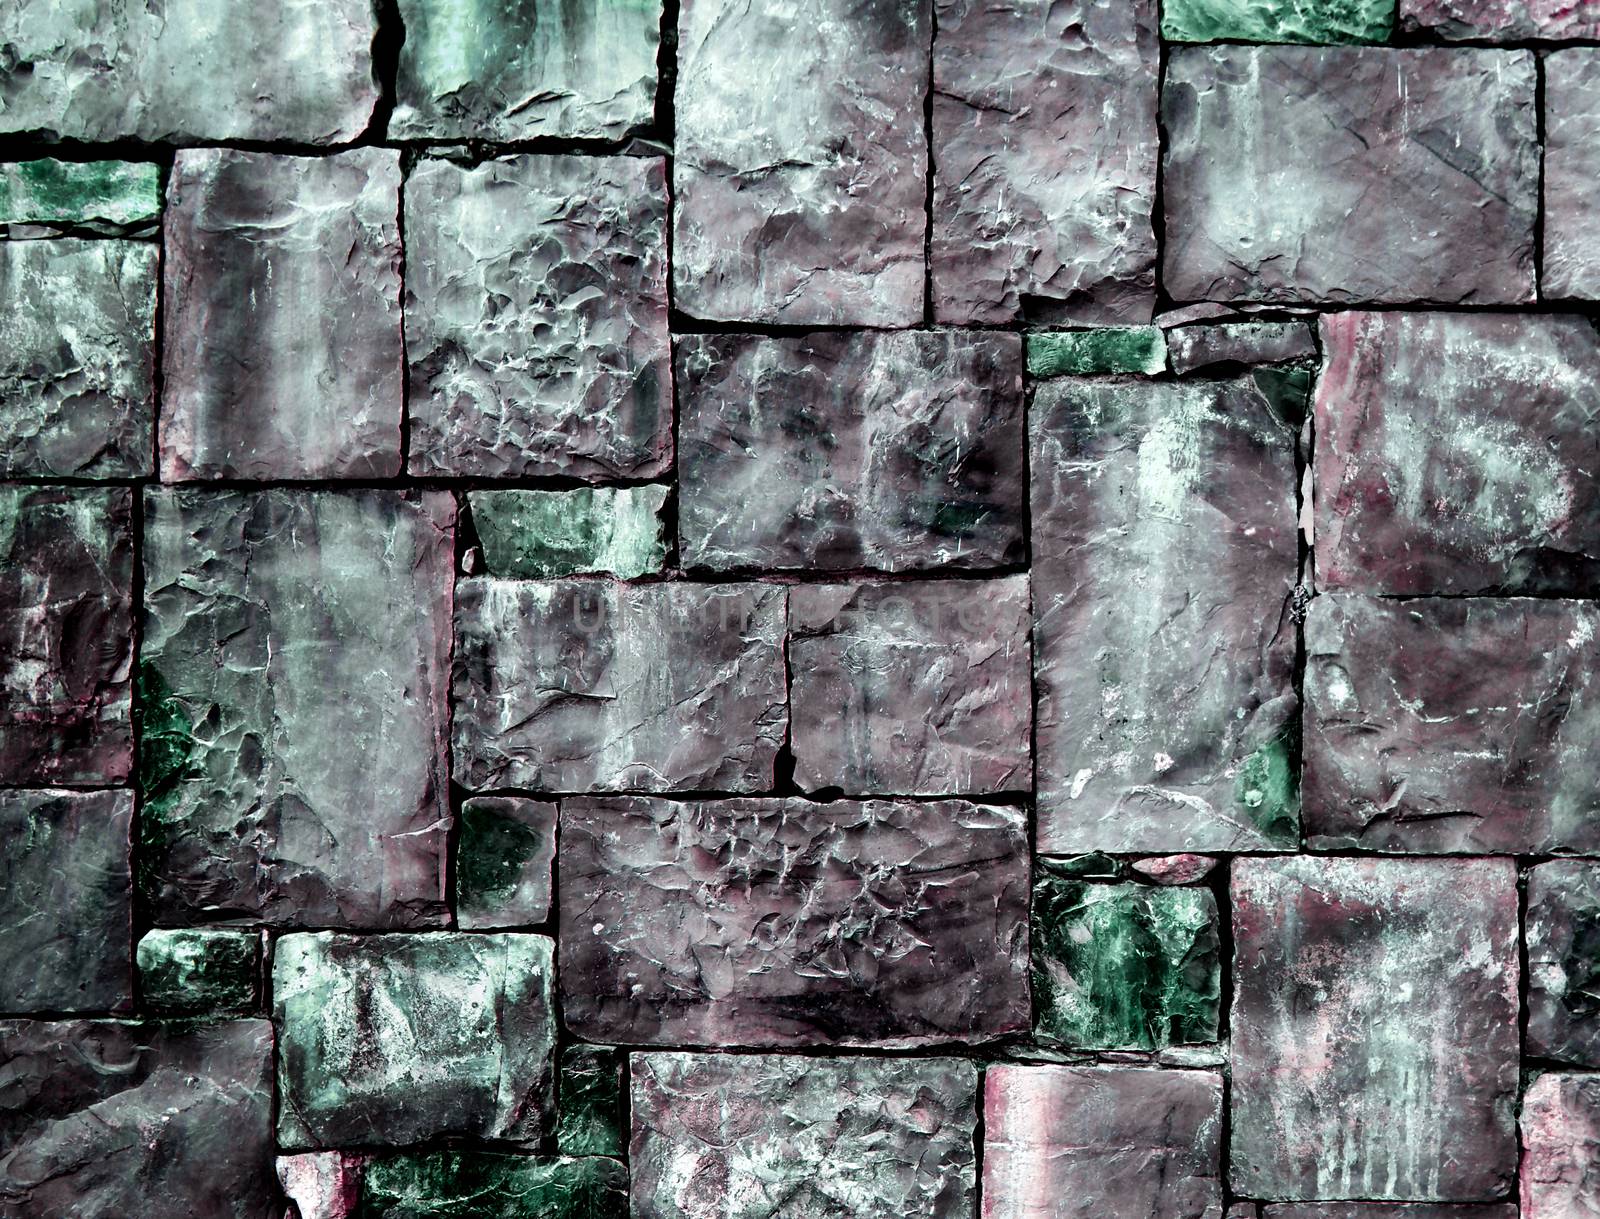 Background of Multi-Colored Cobblestones with Sharp Spears closeup Outdoors. Green and Gray Toned